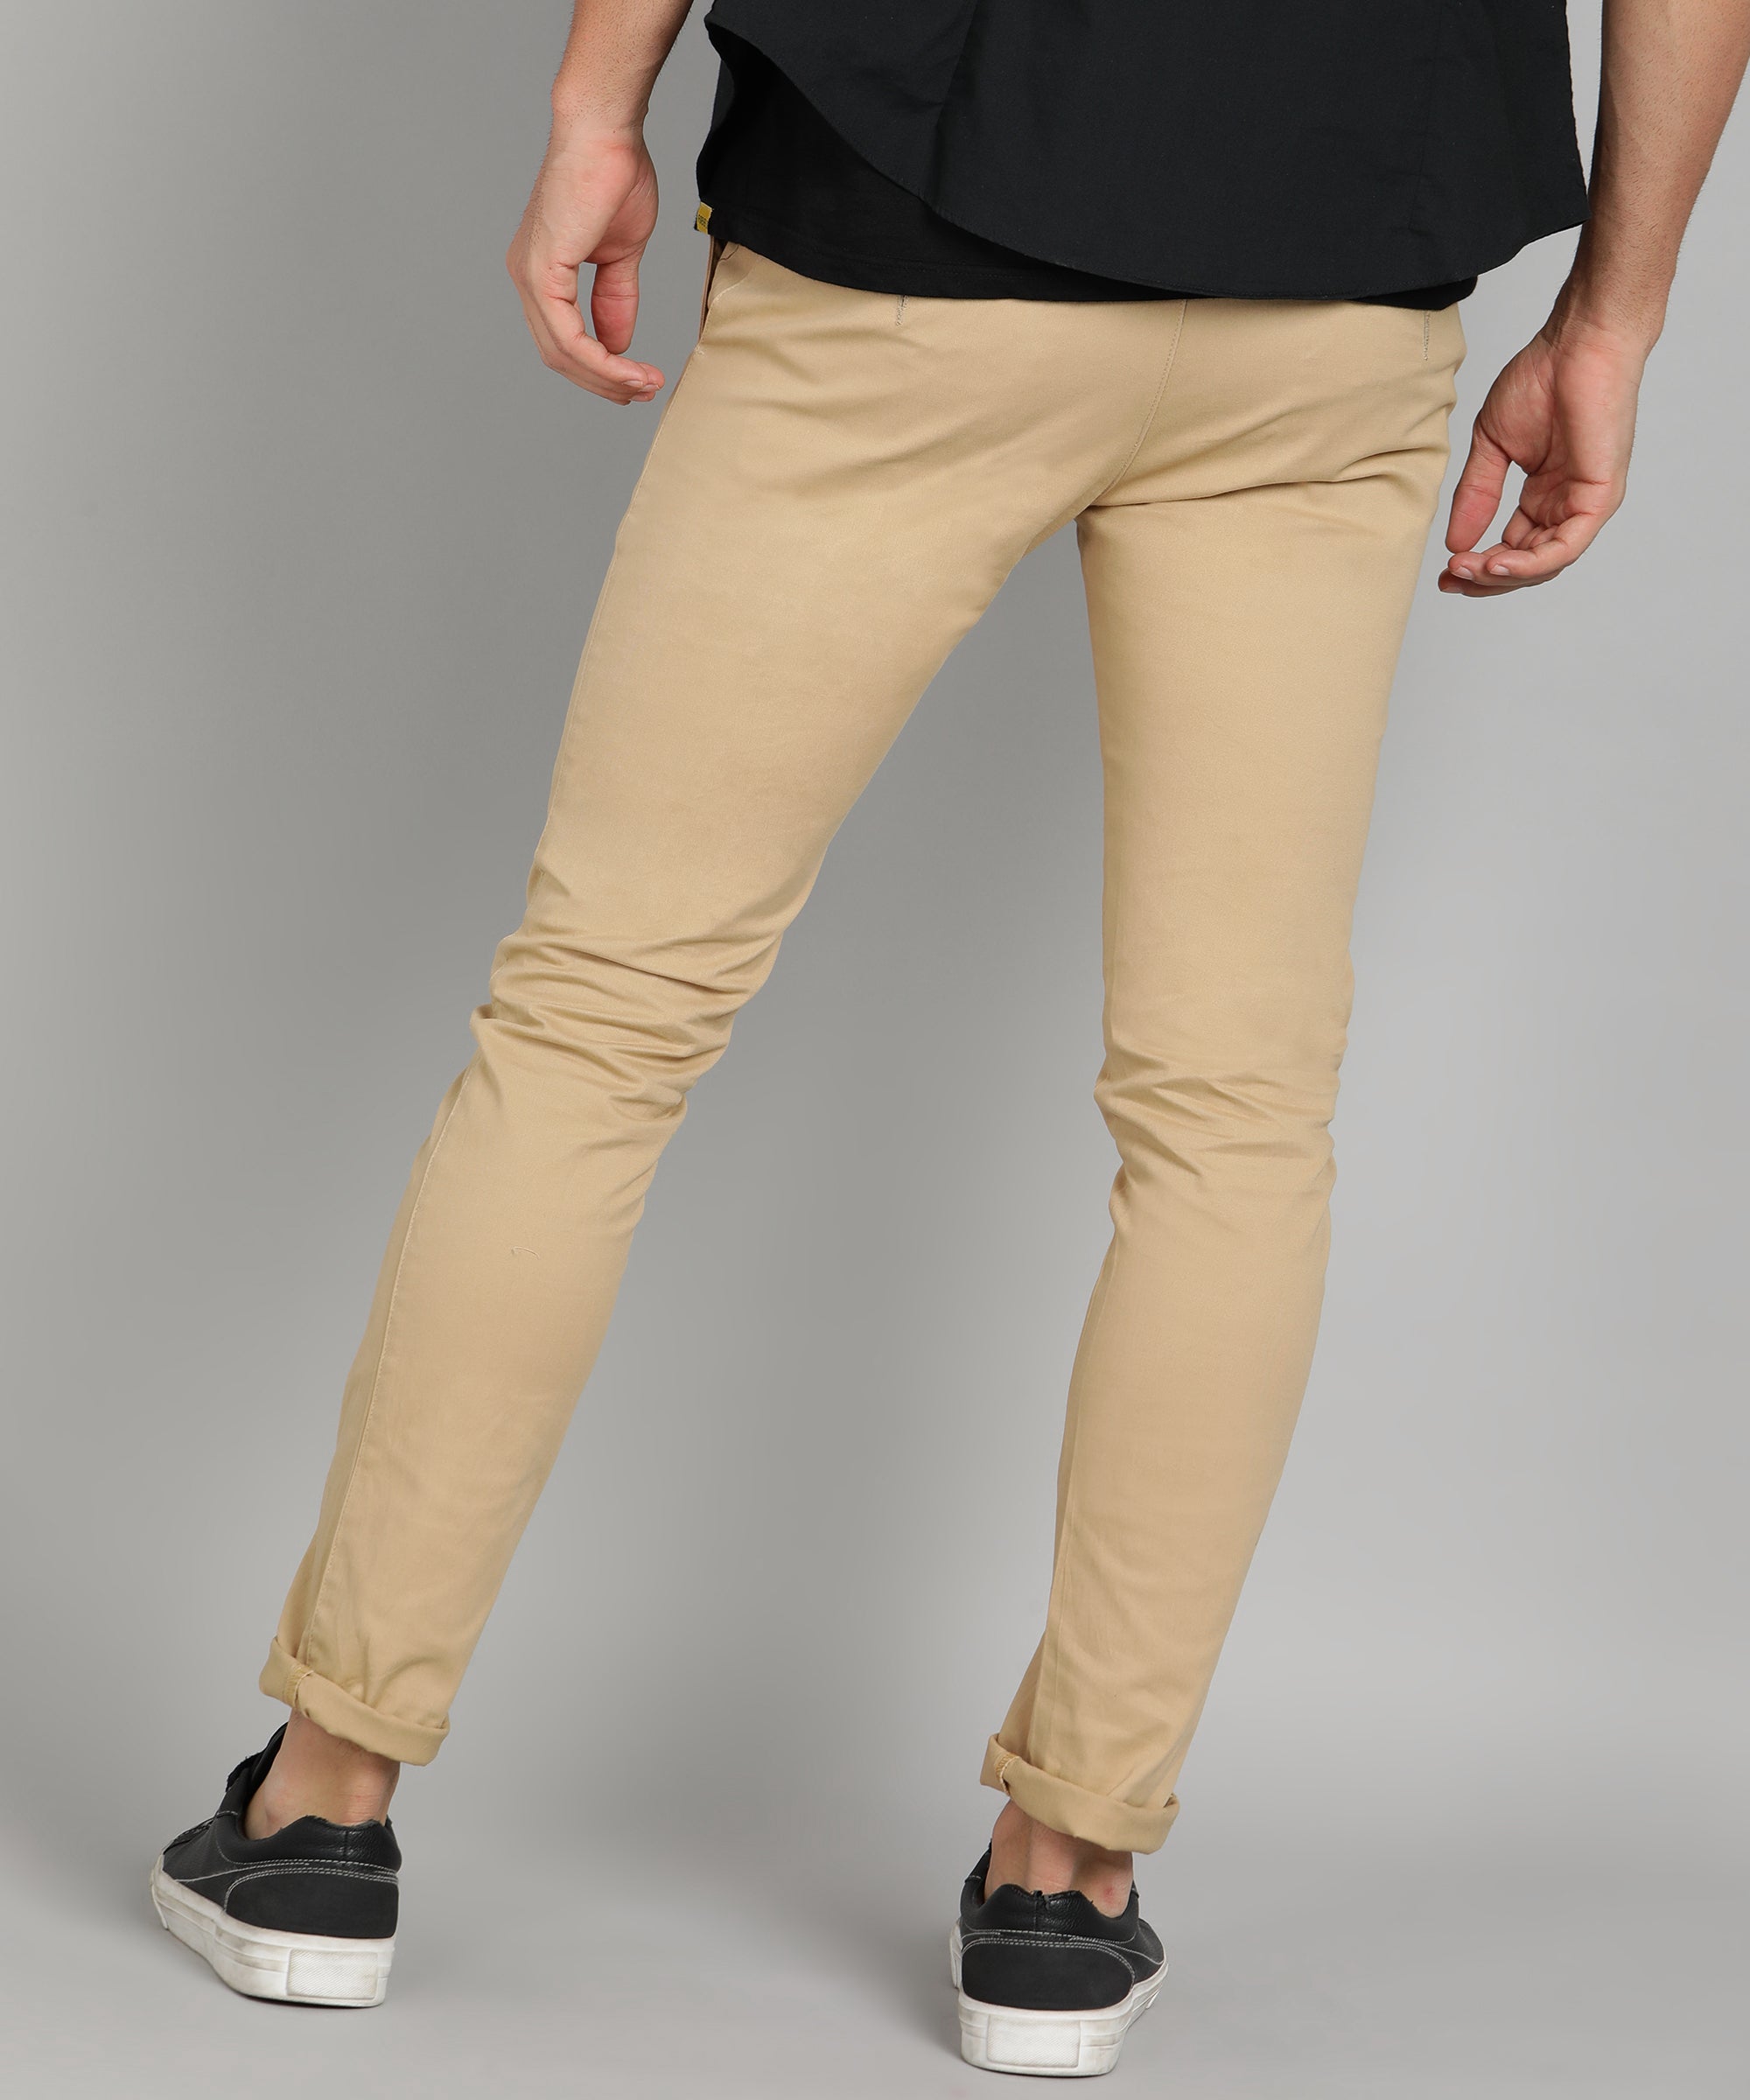 Urbano Fashion Men's Beige Cotton Slim Fit Casual Chinos Trousers Stretch